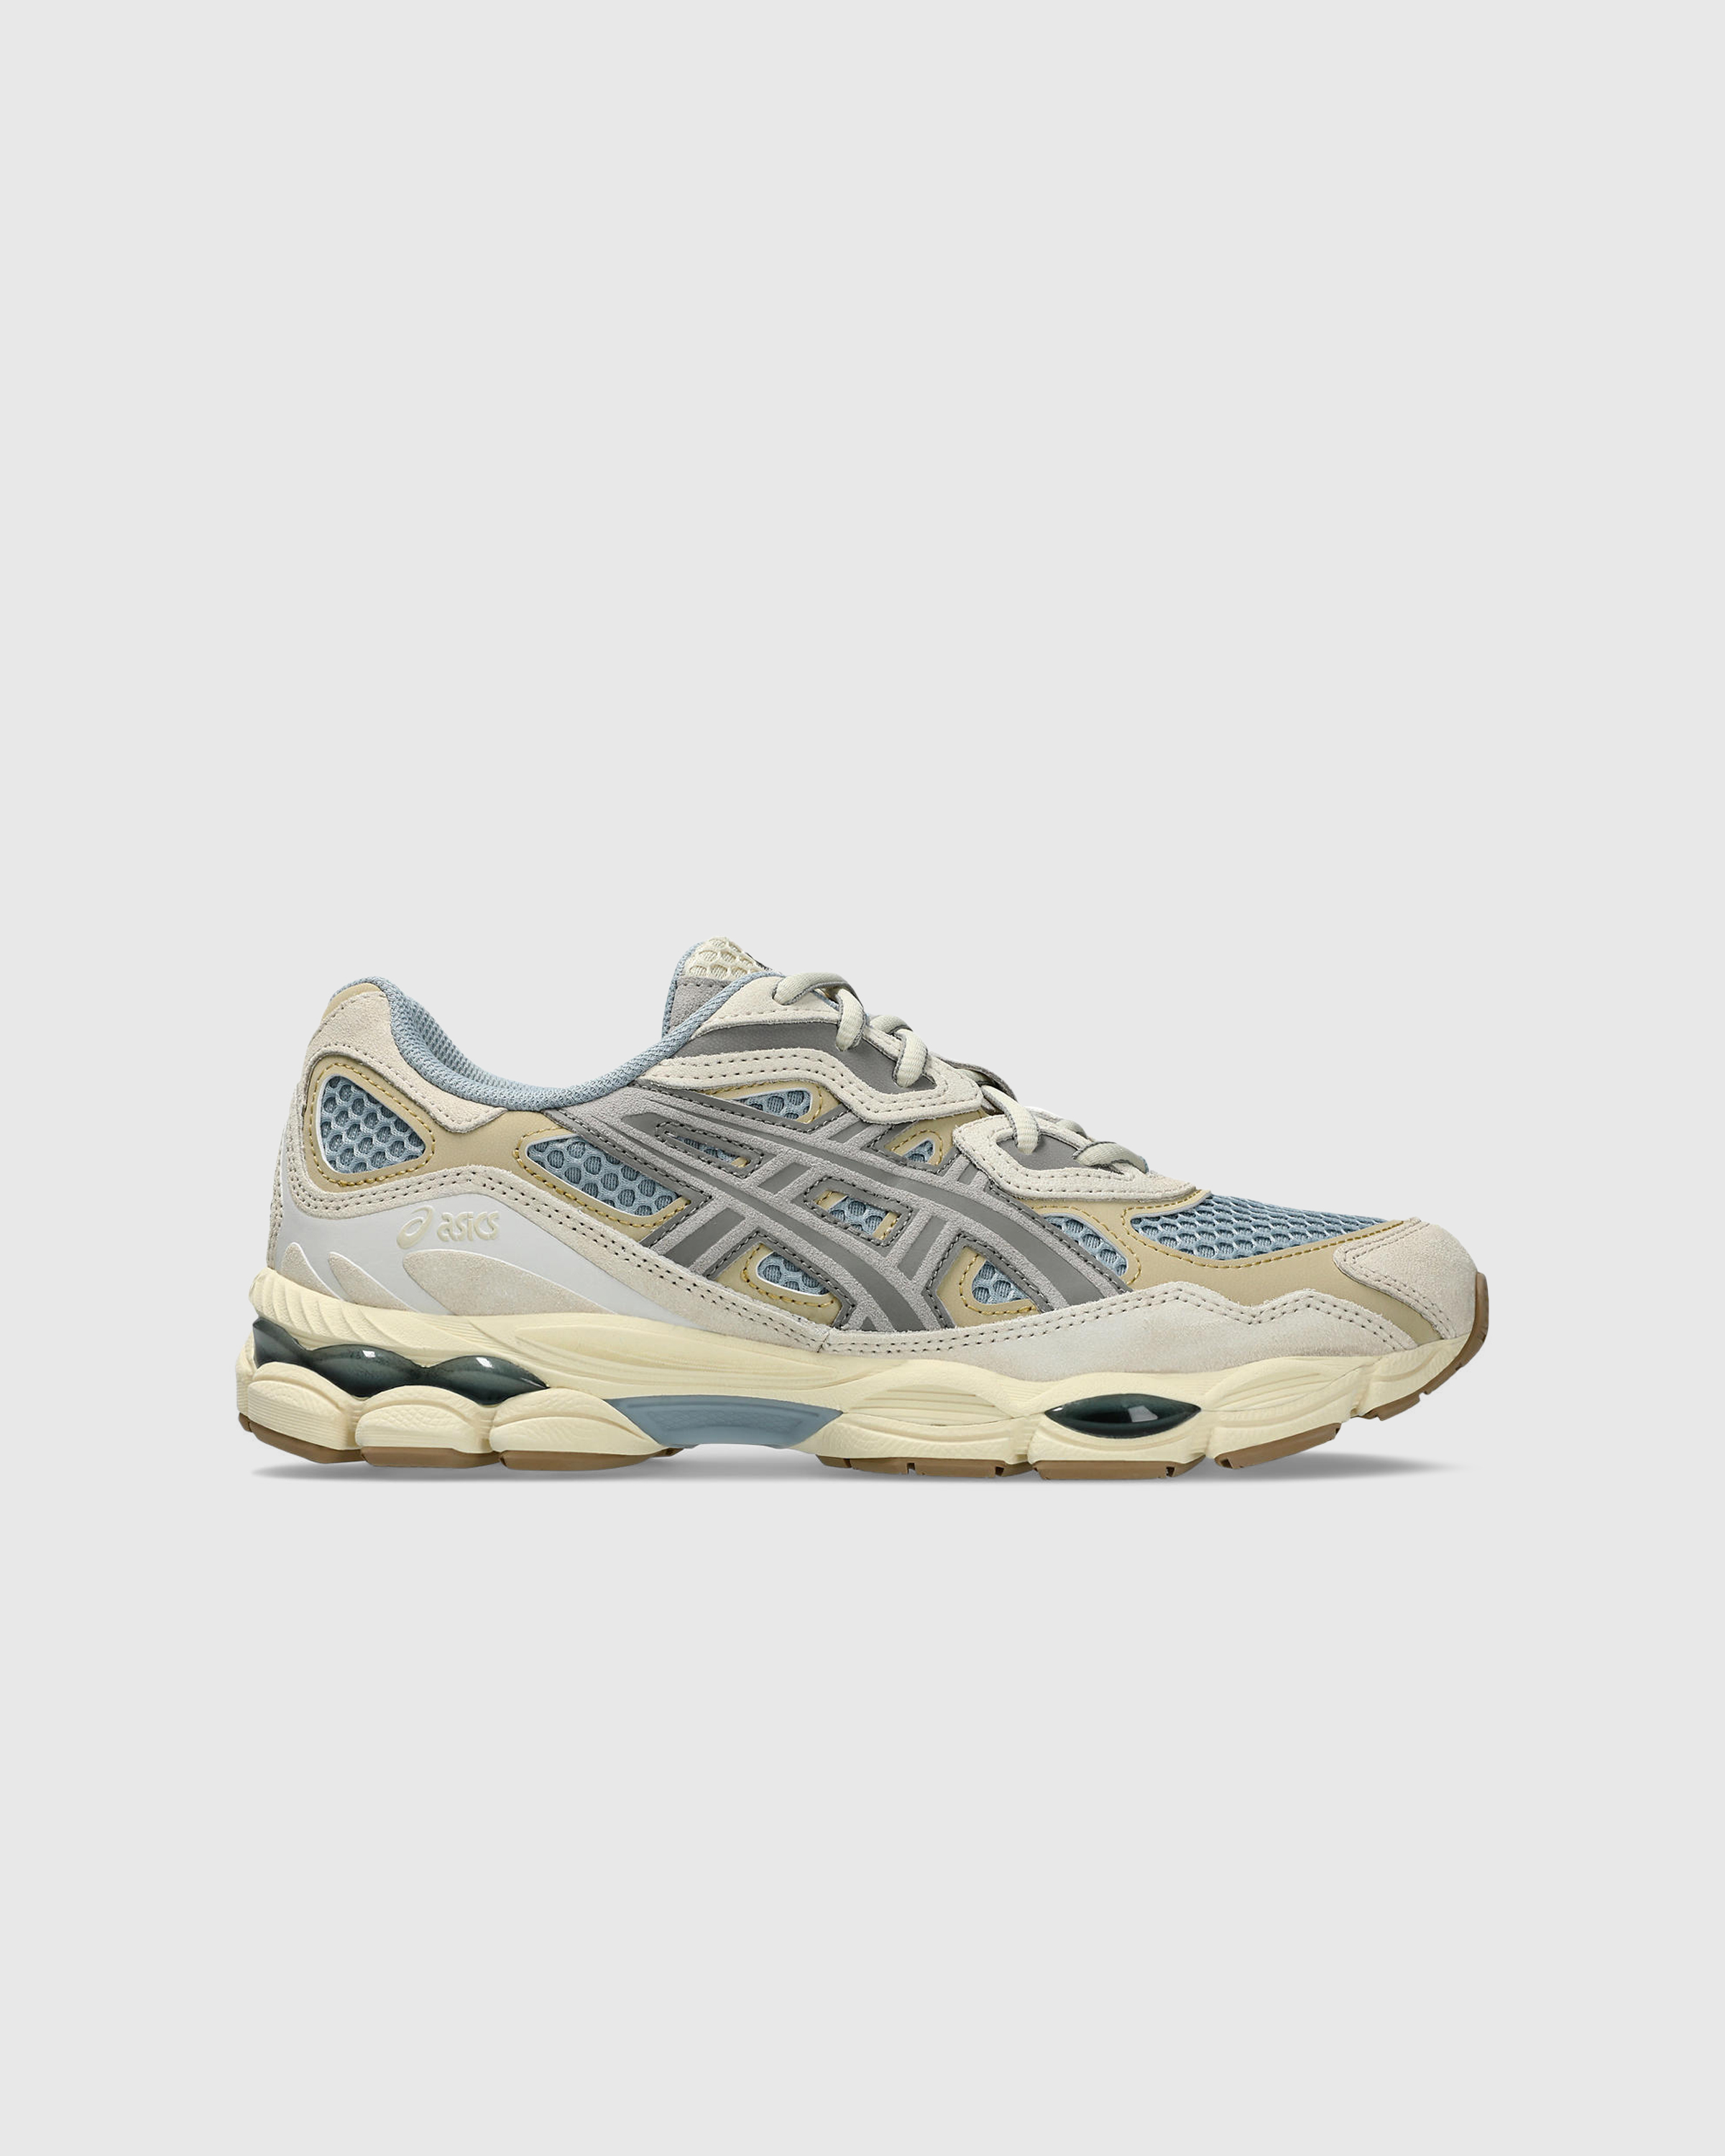 asics – GEL-NYC Dolphin Grey/Oyster Grey - Low Top Sneakers - Grey - Image 1